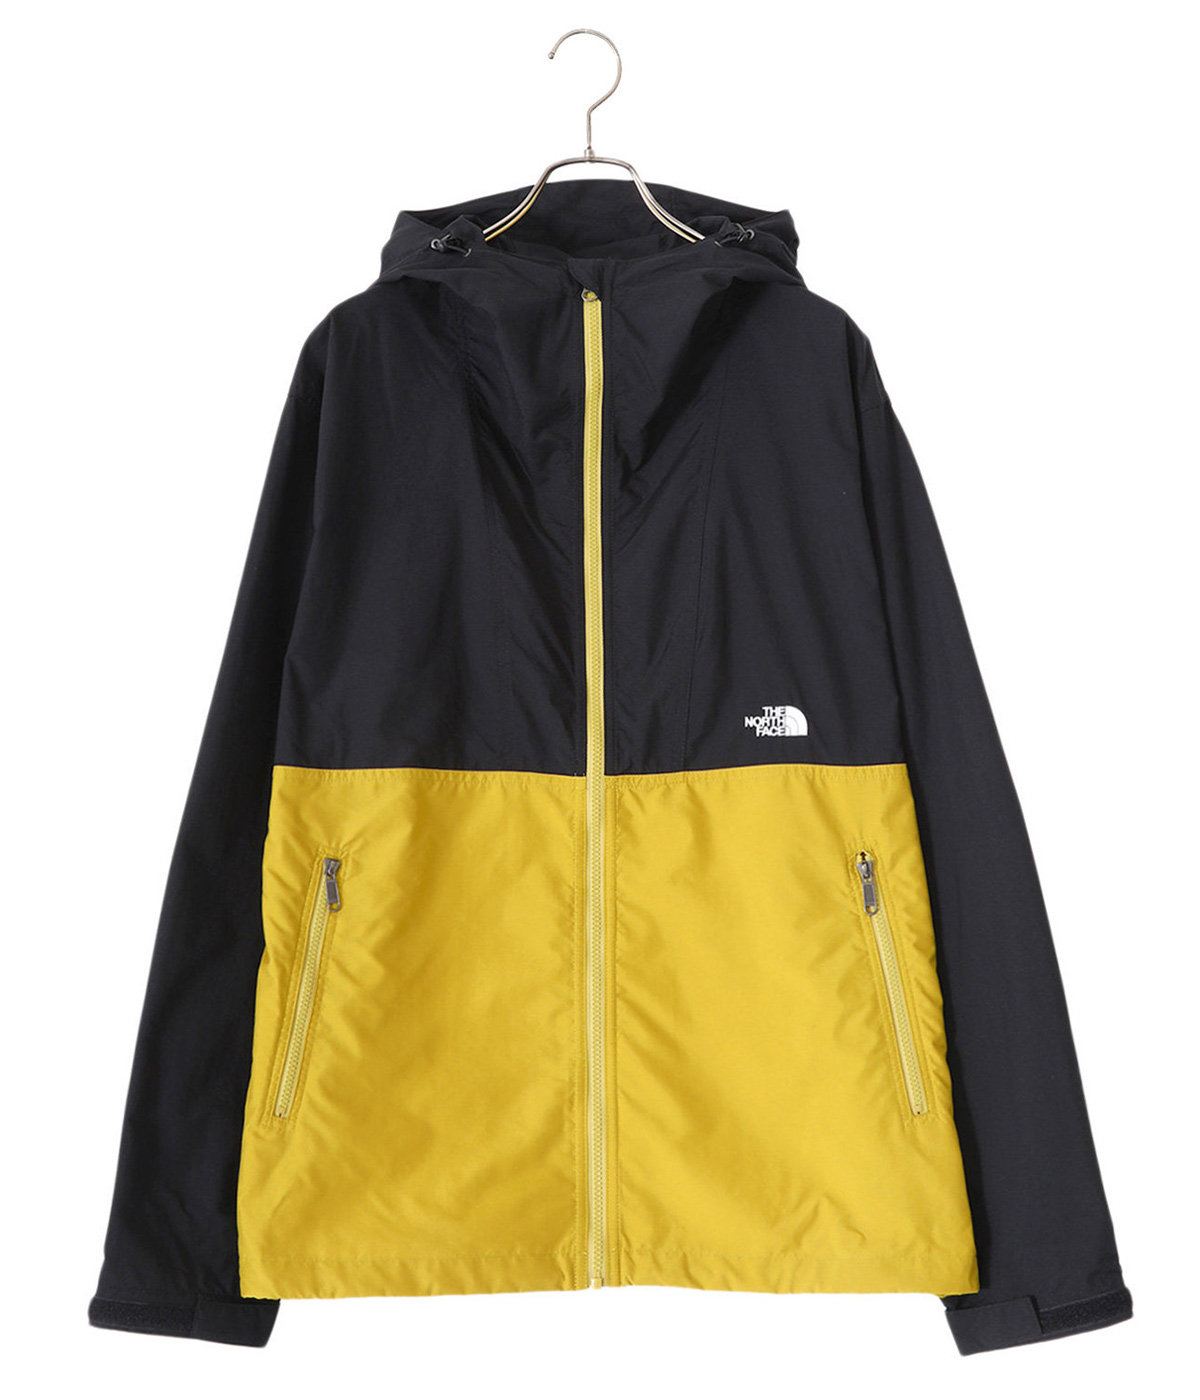 THE NORTH FACE / ザ ノースフェイス ： Compact Jacket / 全5色 ： NP72230｜arknets｜02